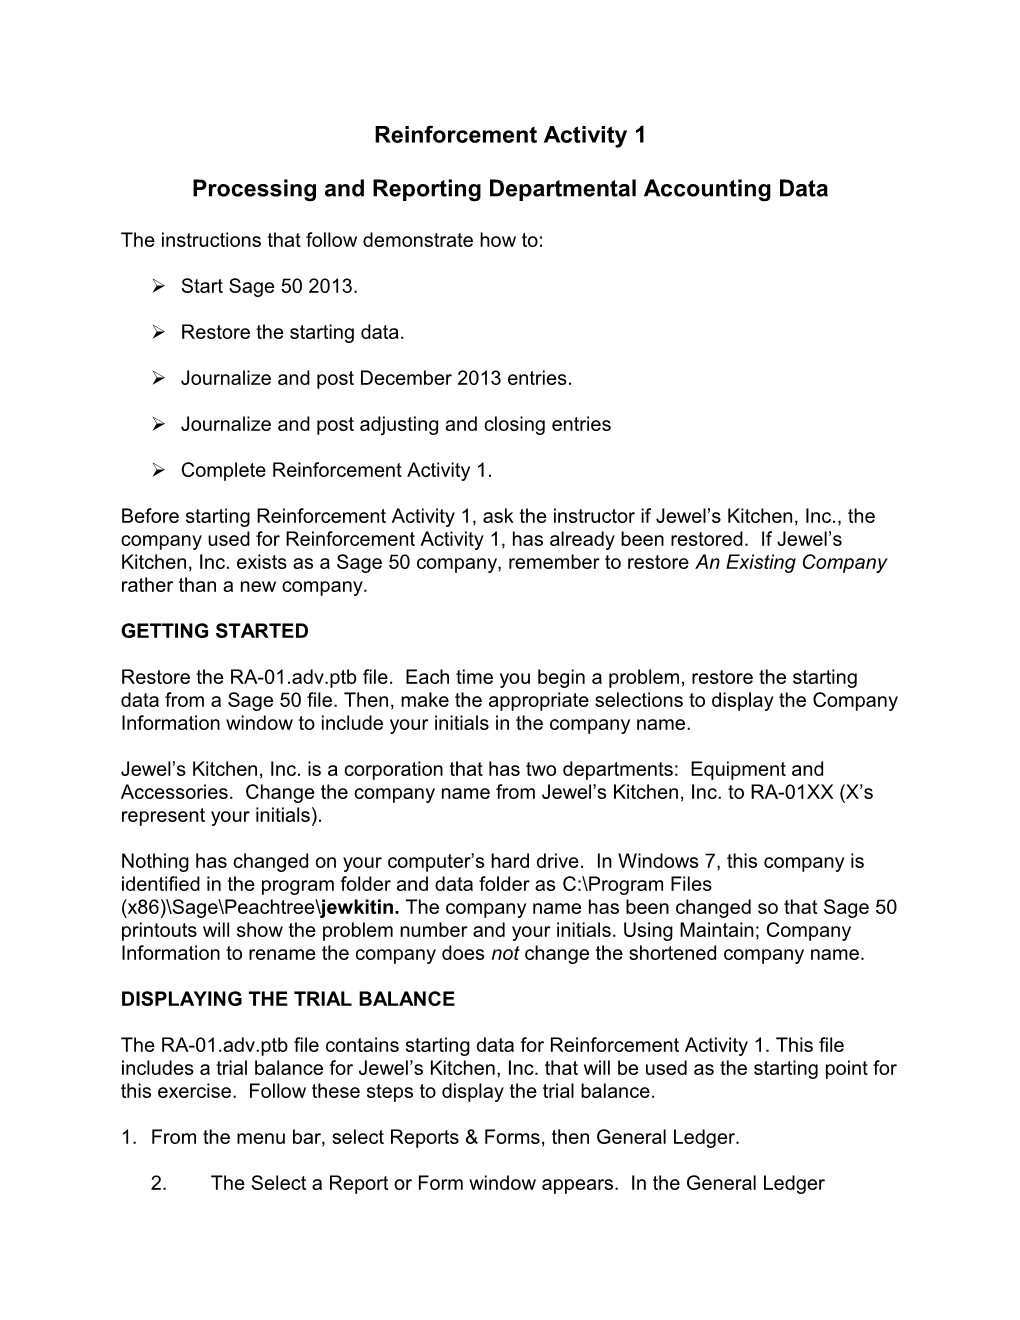 Processing and Reporting Departmental Accounting Data